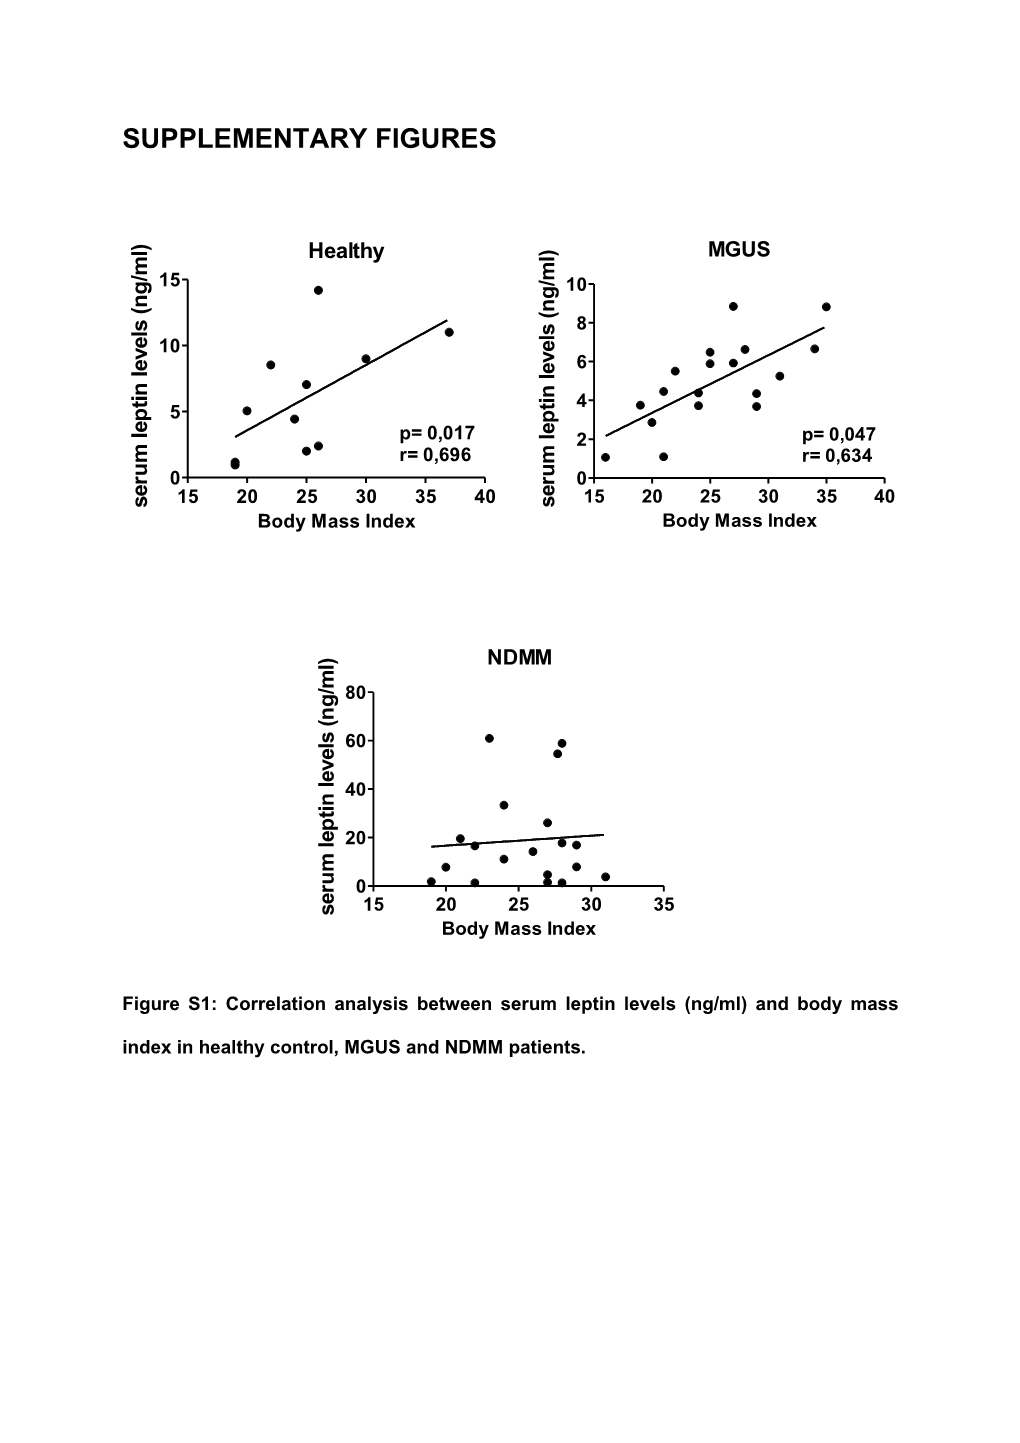 Figure S1: Correlation Analysis Between Serum Leptin Levels (Ng/Ml) and Body Mass Index